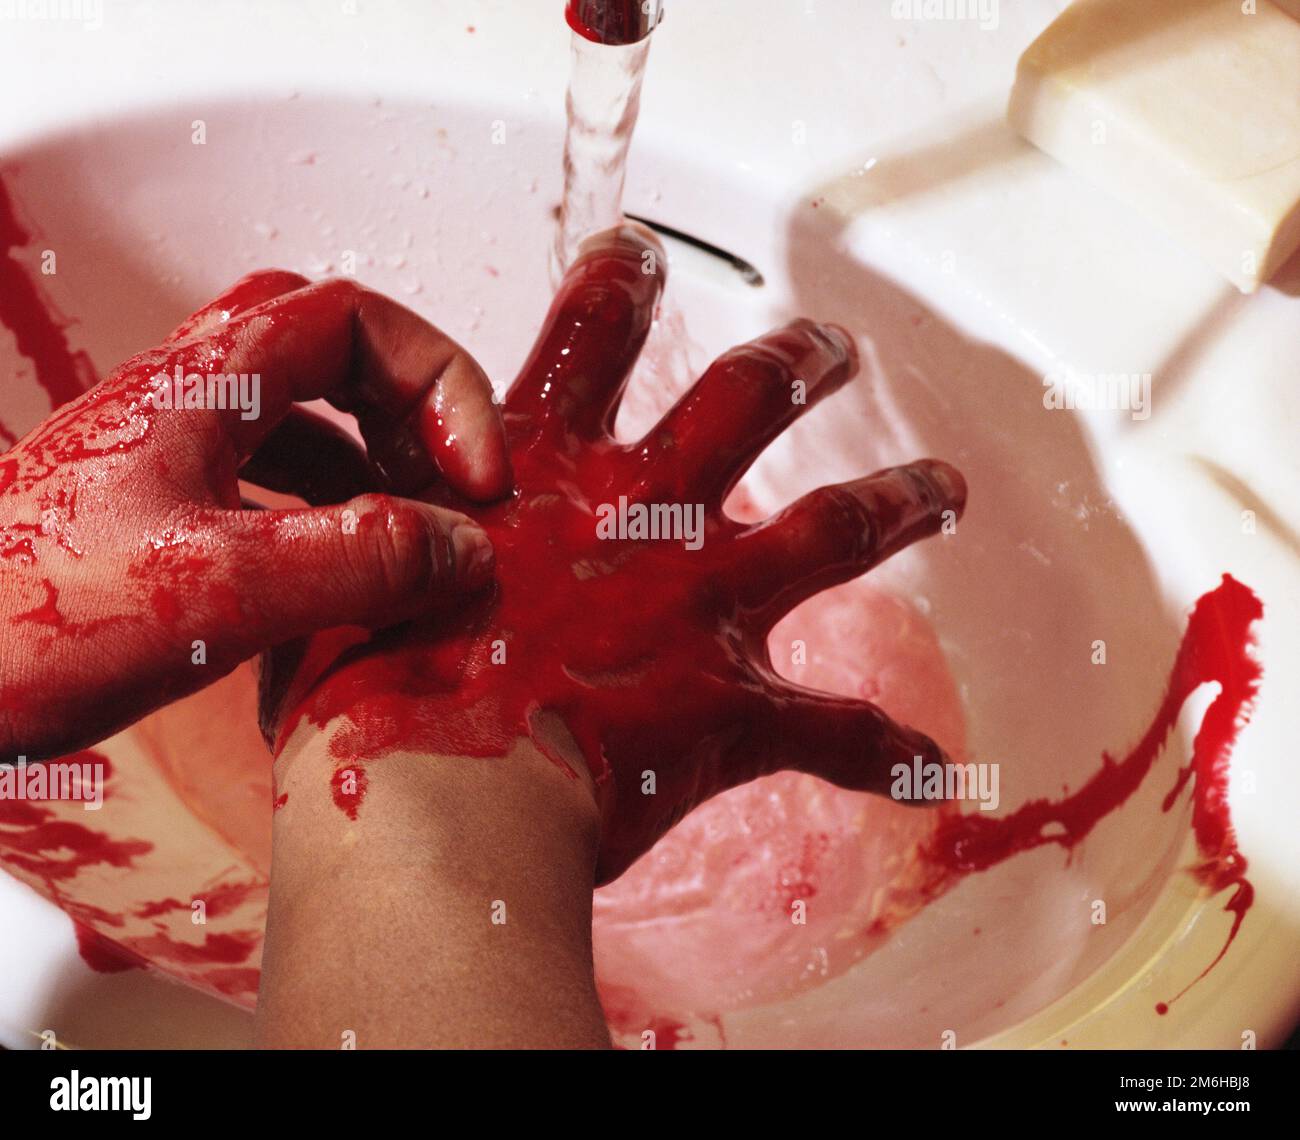 A man washing the blood from his hands with water in a sink basin. Image shot 2000. Exact date unknown. Stock Photo